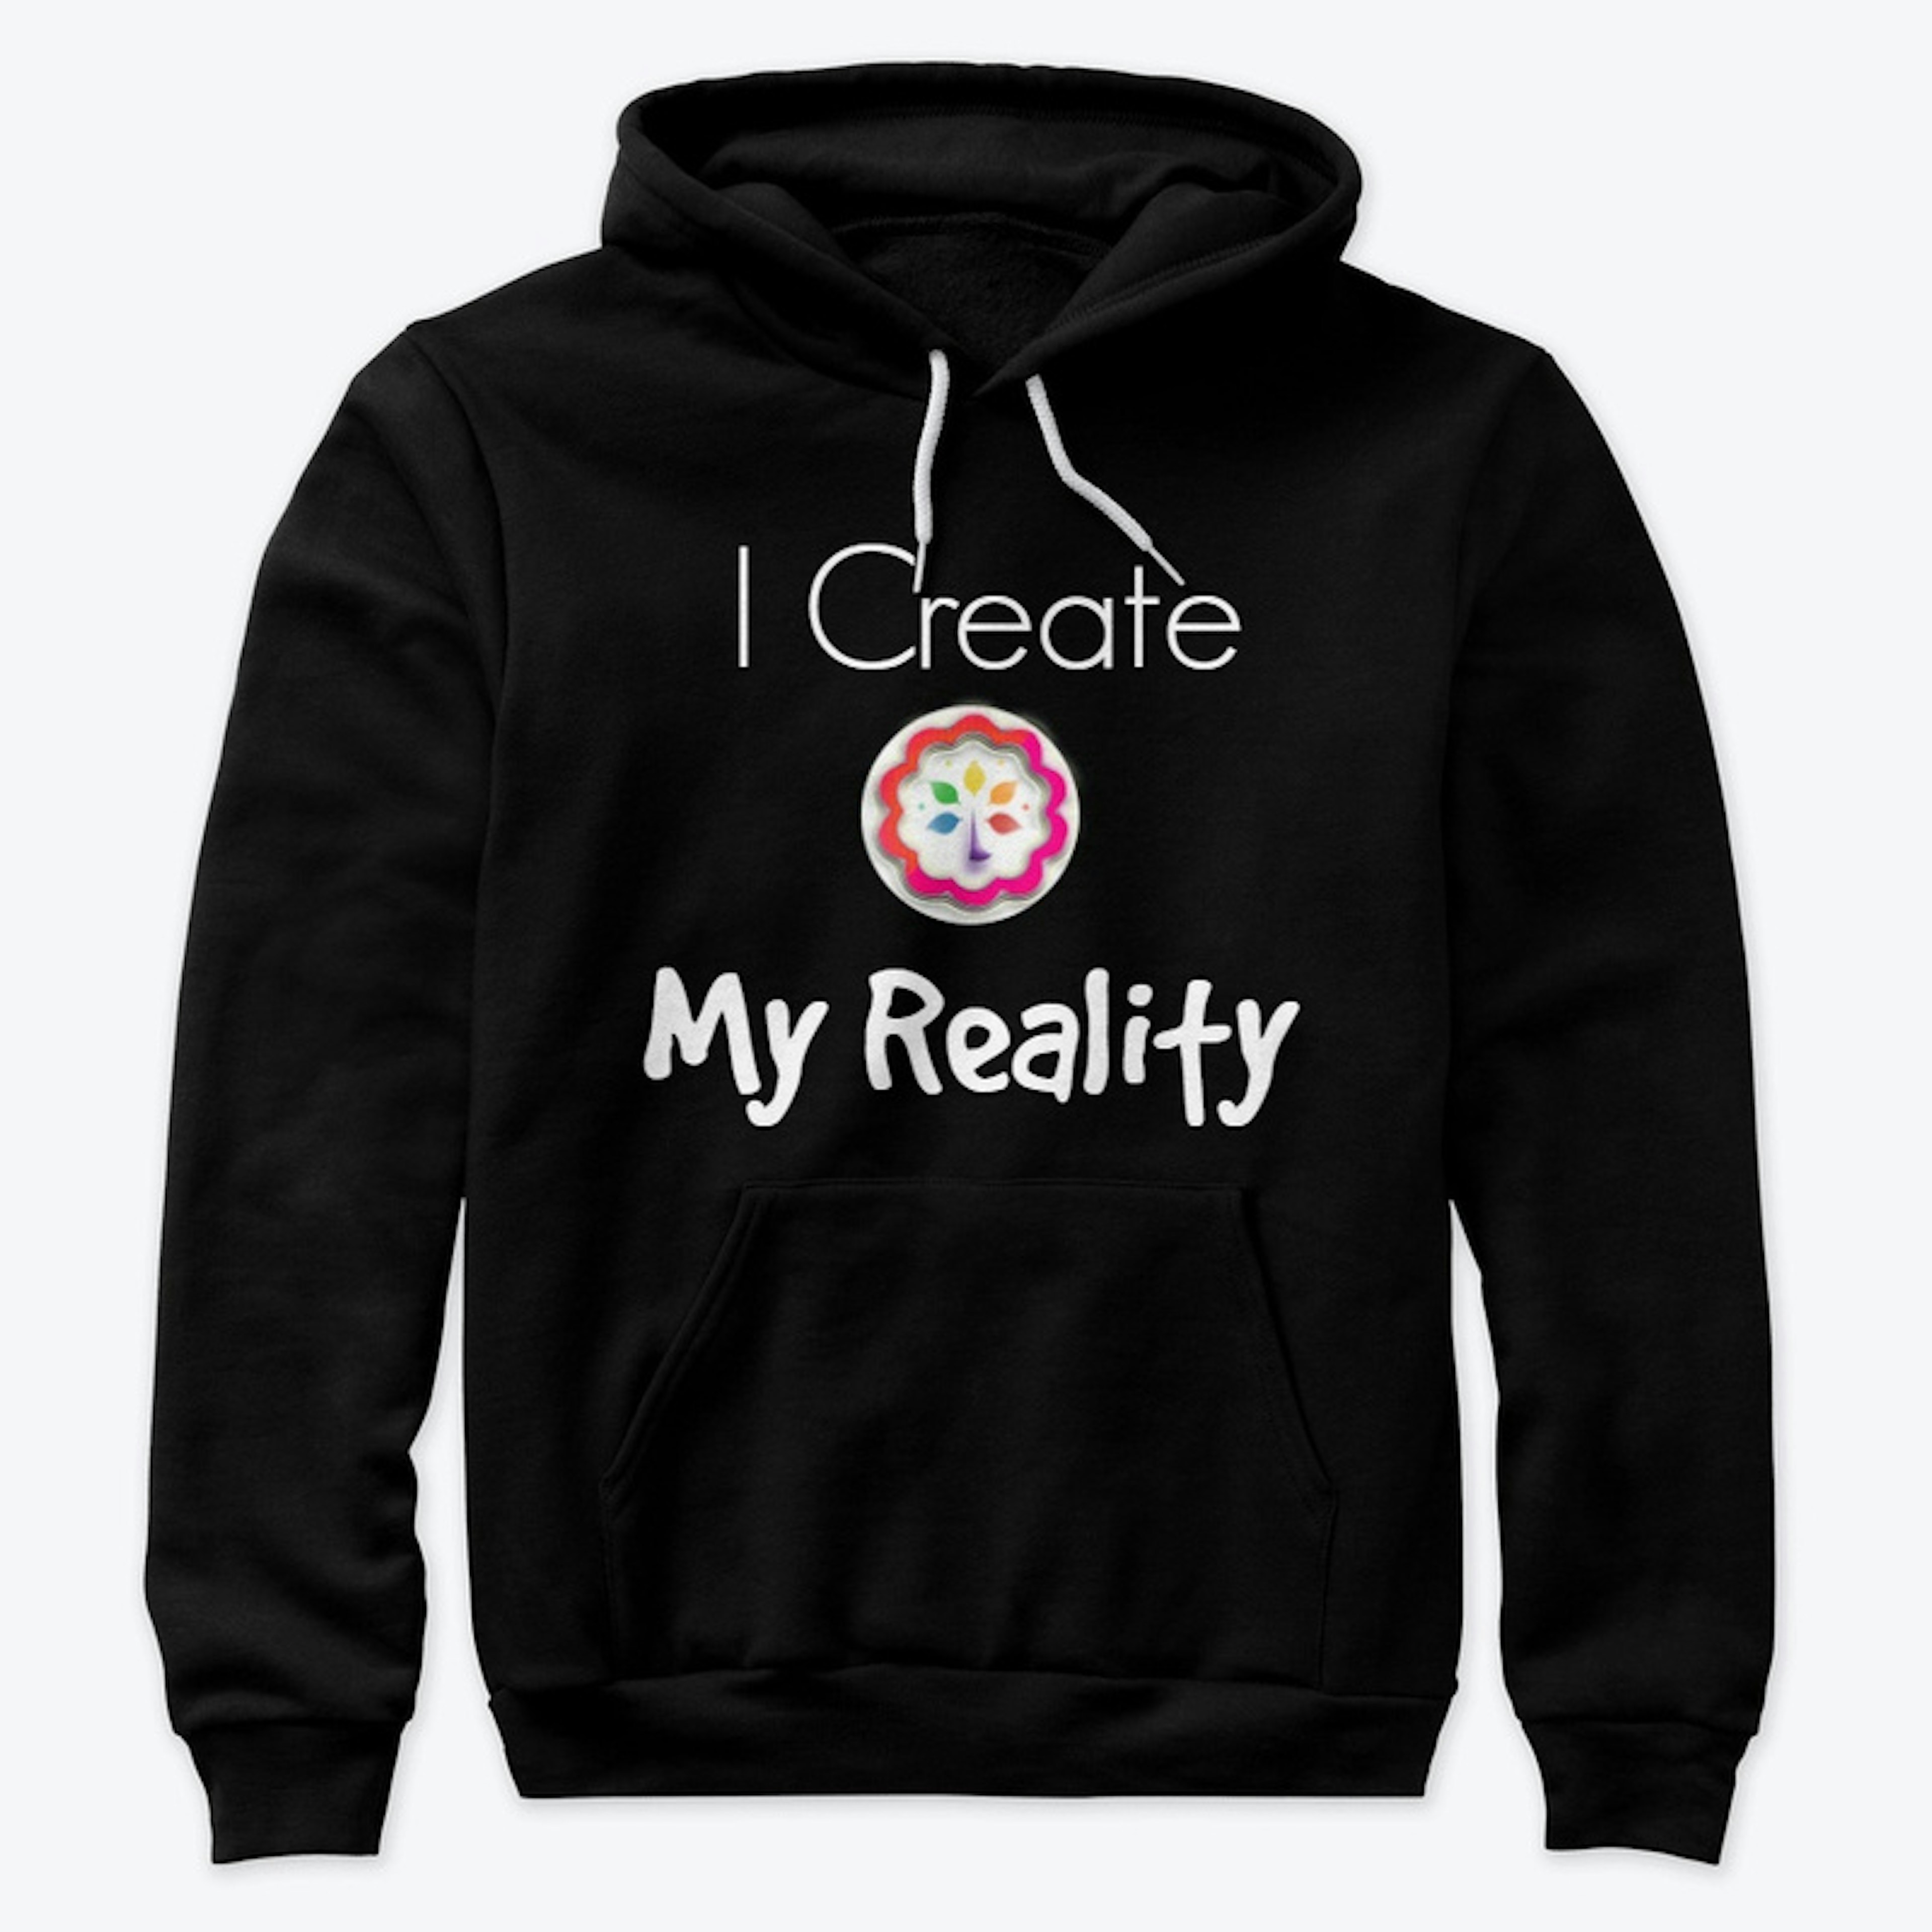 Law of Attraction "I Create My Reality" 